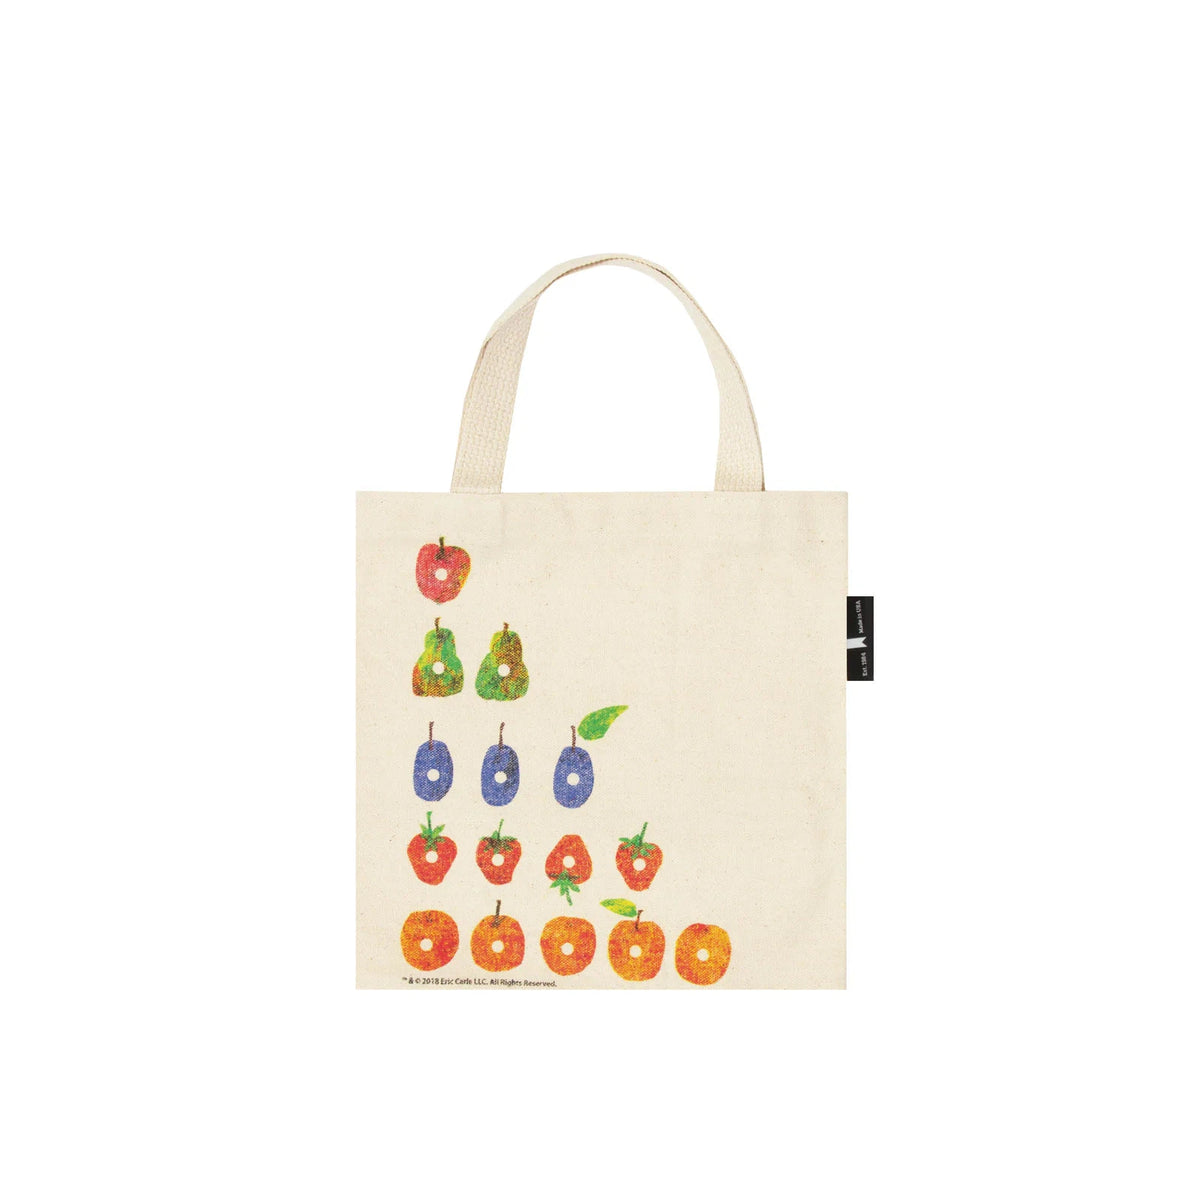 The Very Hungry Caterpillar Mini Tote Bag